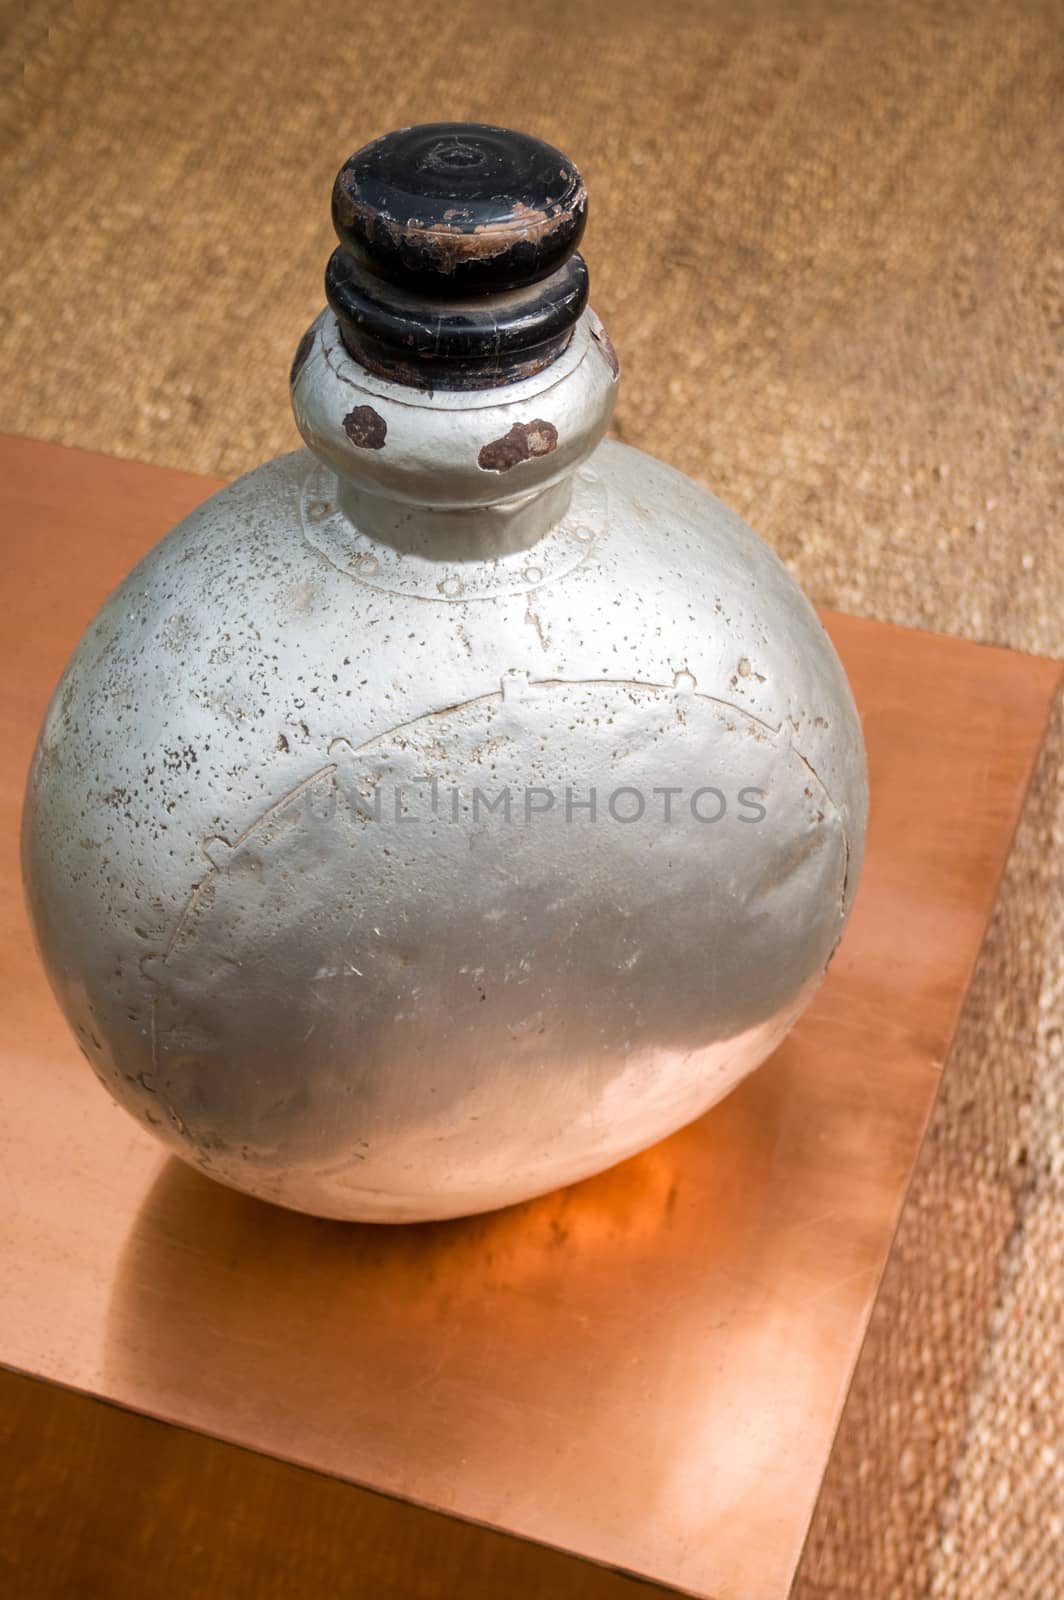 Vertical color portrait in a studio showroom interior displaying old industrial aluminum chemical bottle standing on a copper plated occasional table. Generic shot location was Bombay India, available with property release.